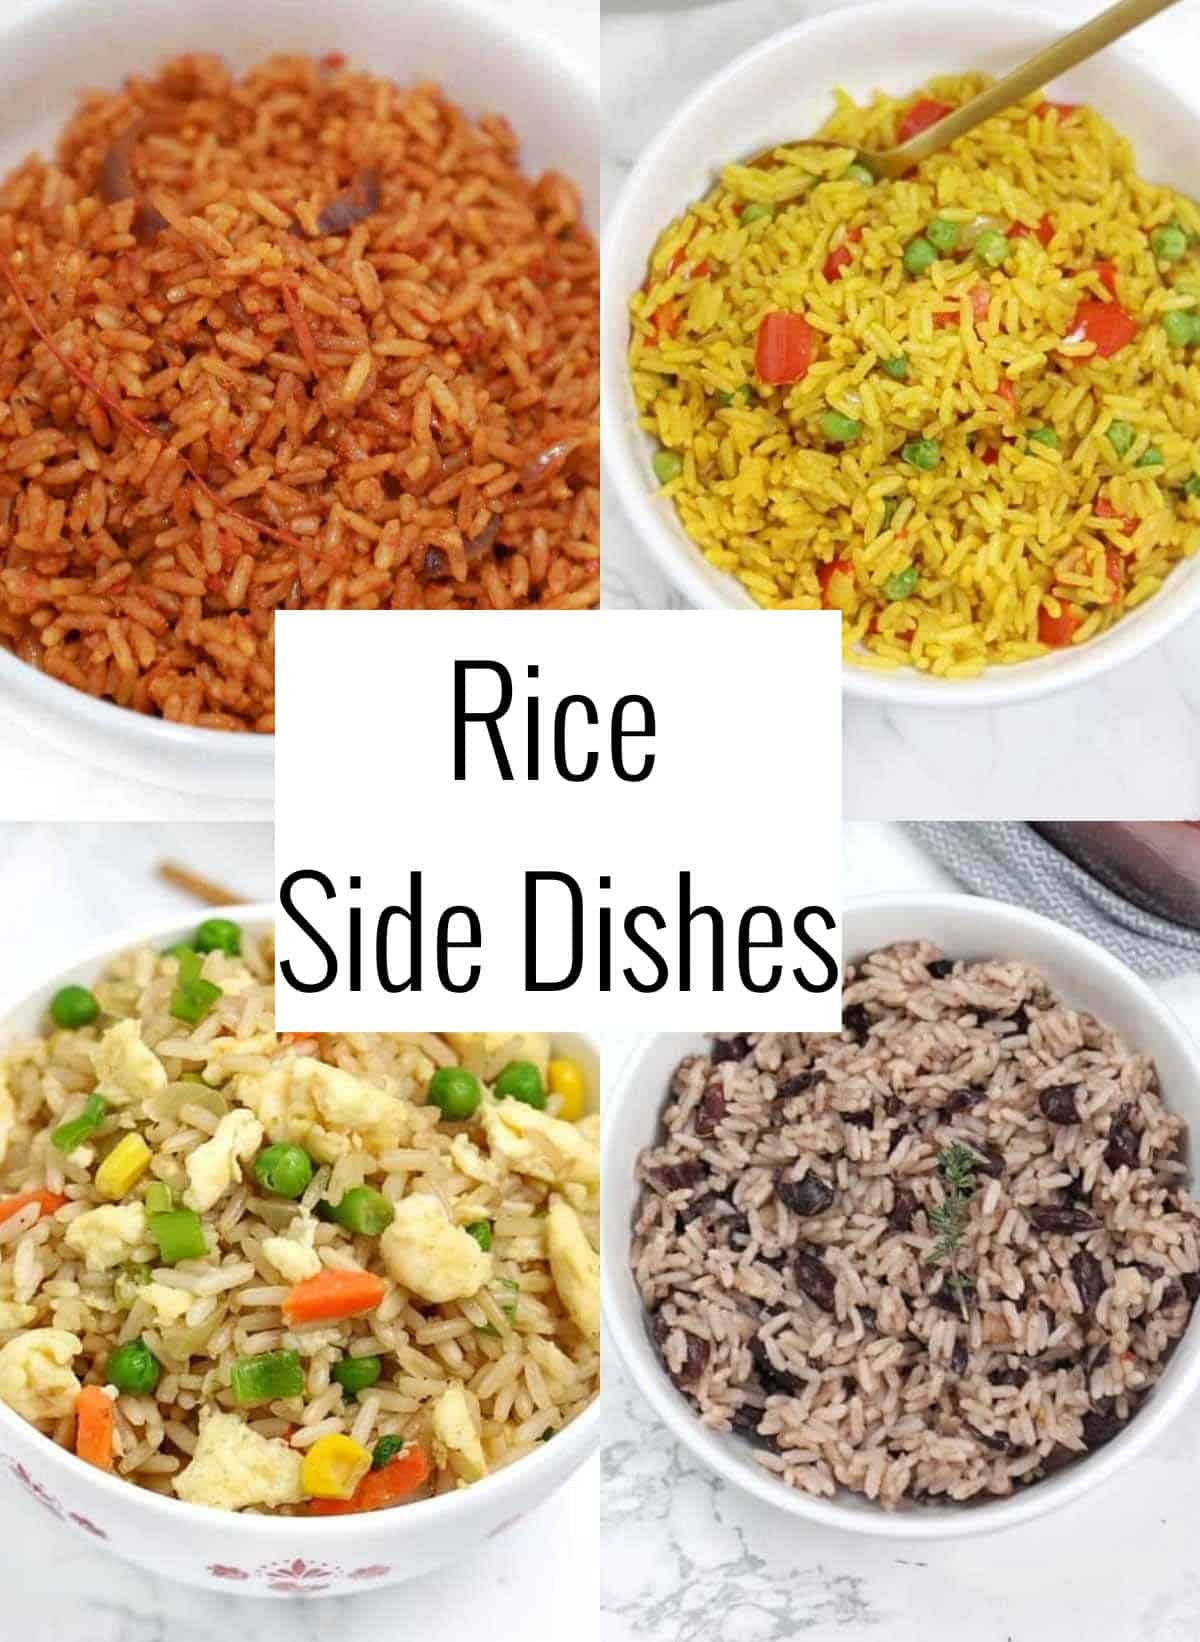 4 rice dishes in a picture.